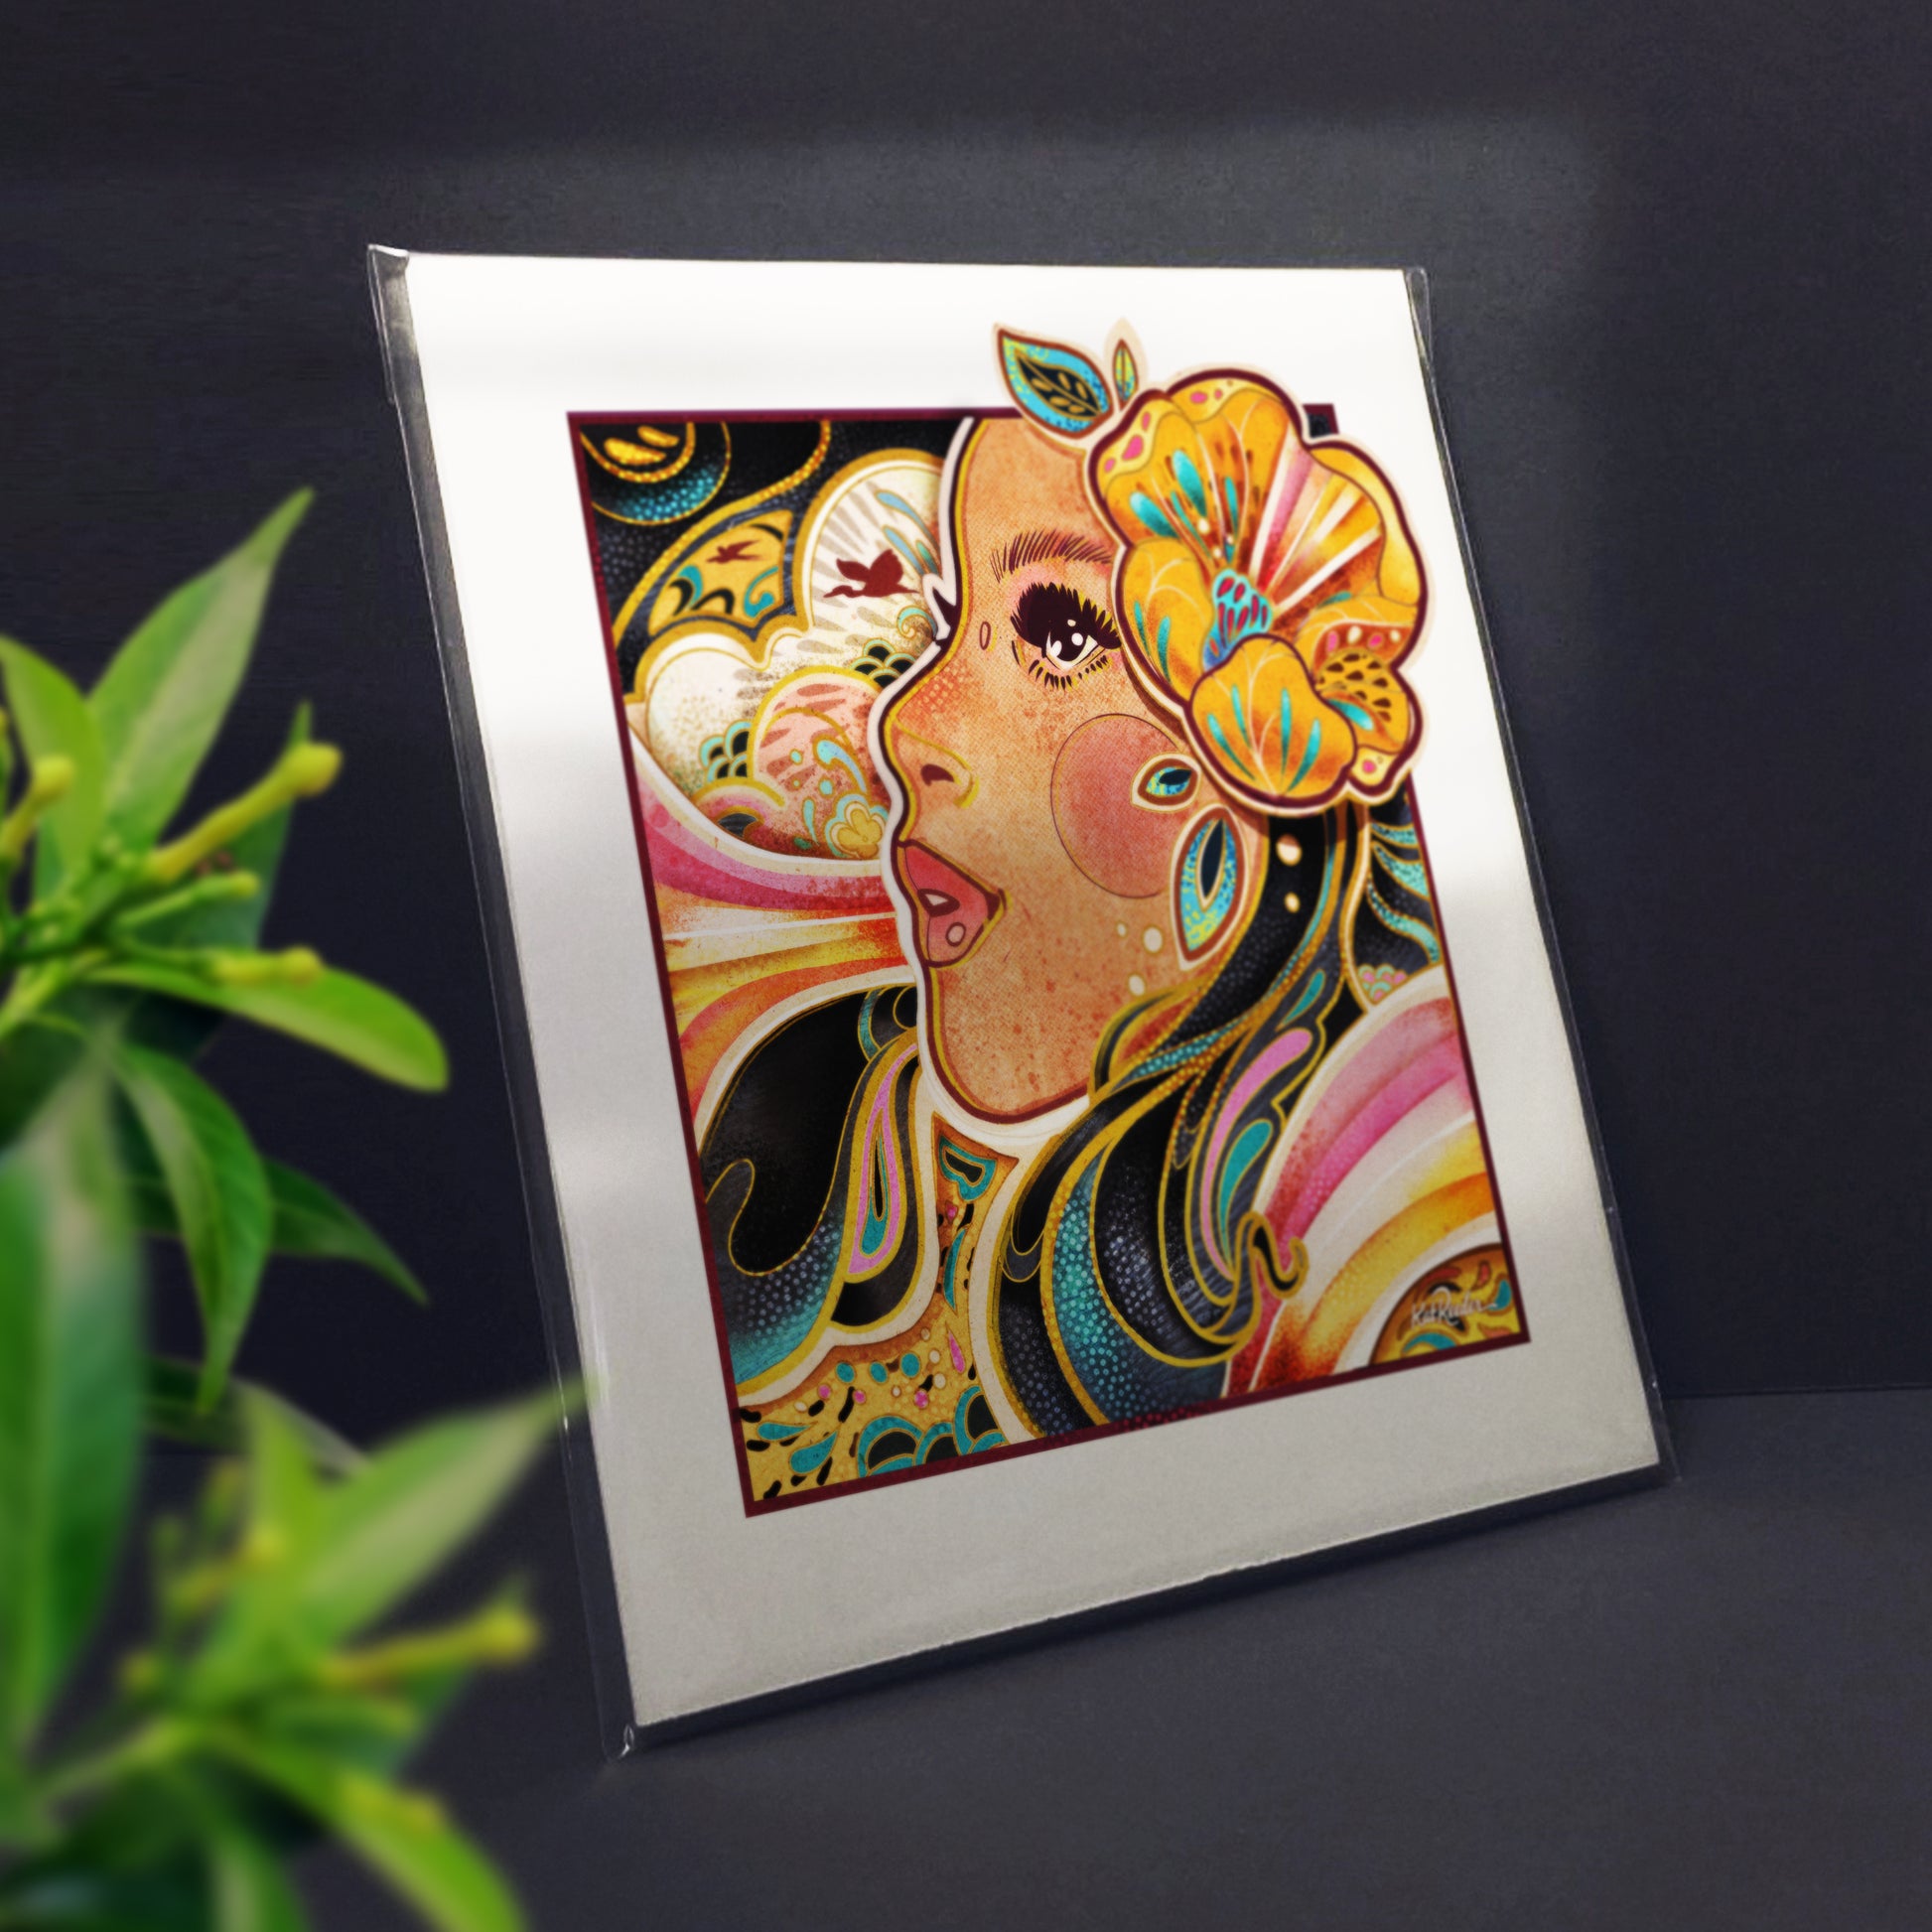 vintage-style illustration a dark haired woman’s face in profile, with a yellow hibiscus in her ear, surrounded by abstract psychedelic swirls and rainbows in the style of an 80s illustration